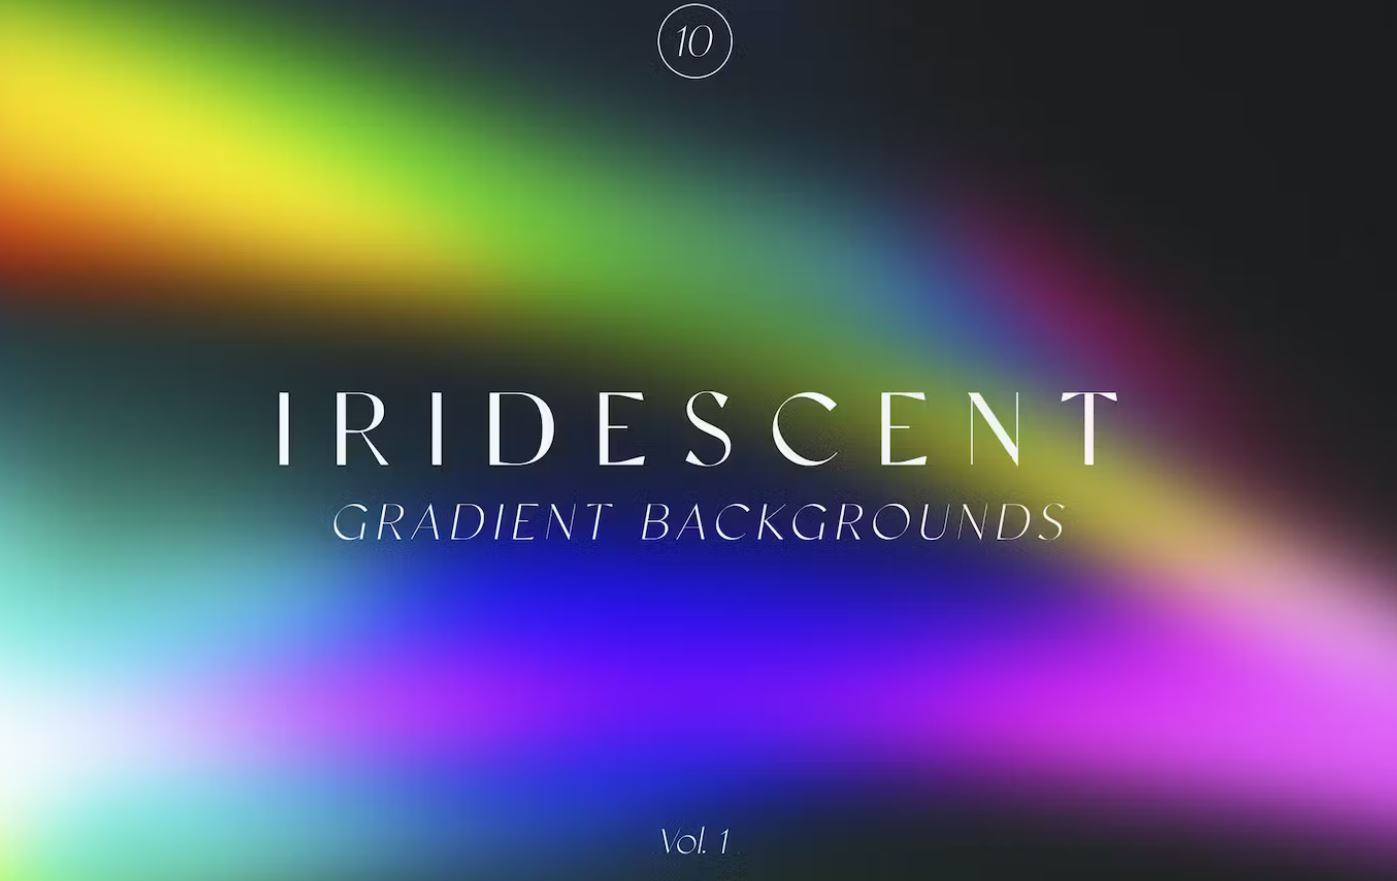 Iridescent gradient backgrounds for print templates